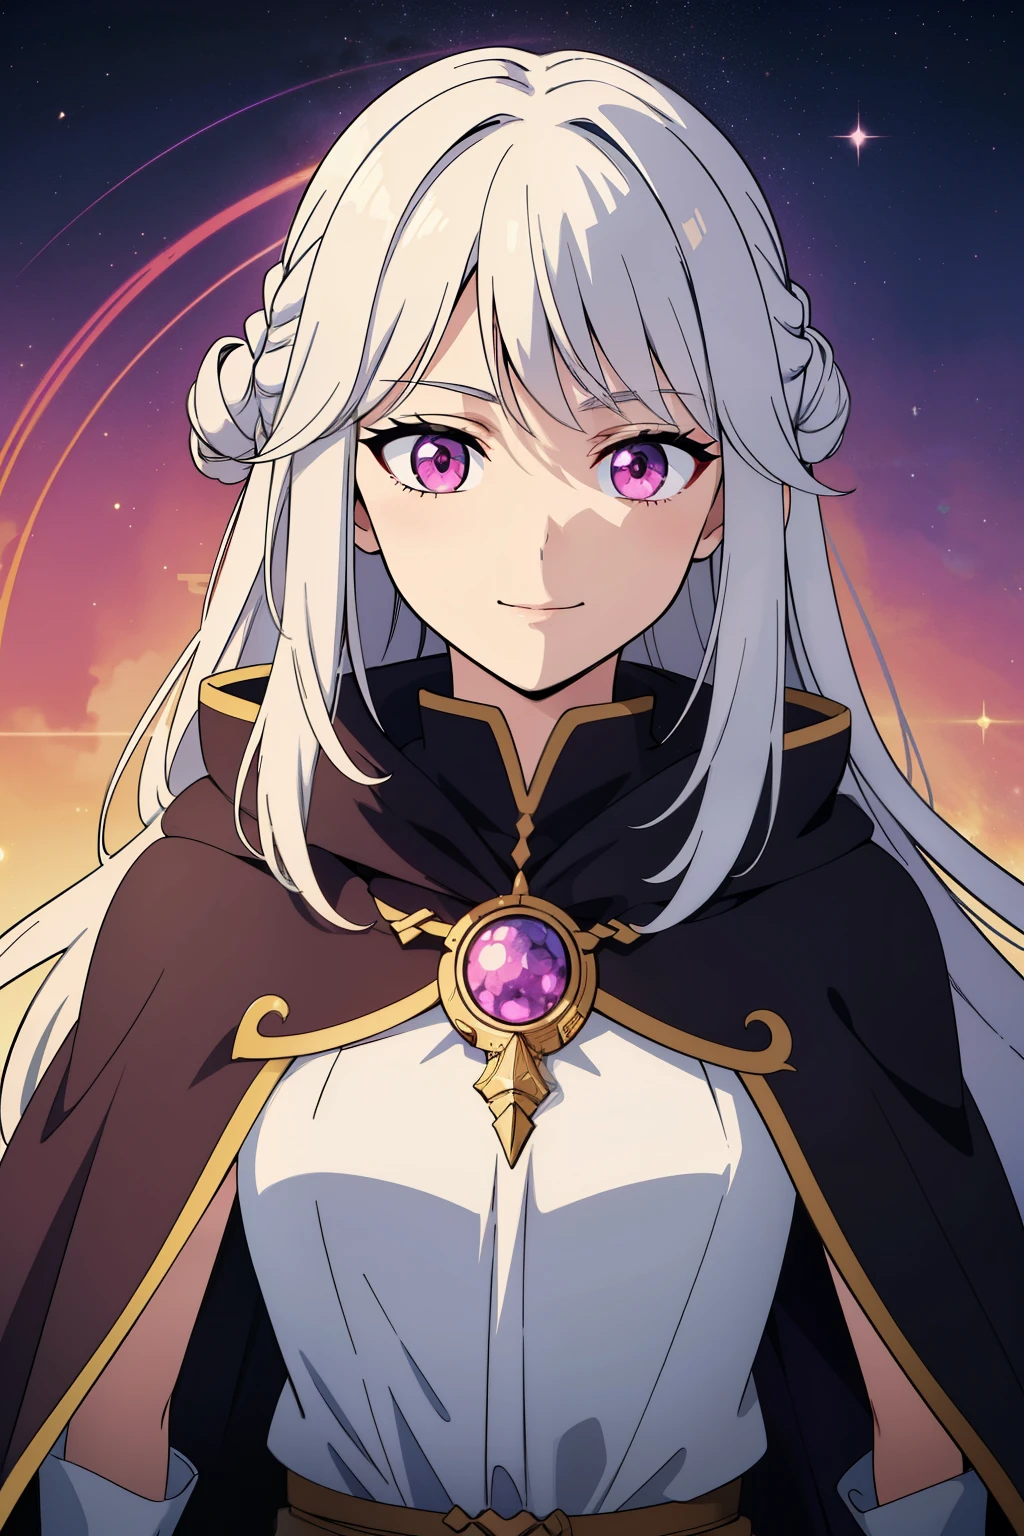 (high-quality, breathtaking),(expressive eyes, perfect face) 1female, female, solo, short height, young teenager age, long length hair, white hair color, glowing hair, unkept hair, pink eyes, kind expression, smiling, warm soft smile, cloak, shirt, fantasy mage clothing, adventurers attire, Venus planet, Venus Roman God of the Love, space background, portrait, upper body, magic, flower in hair, gorgeous flowy wavy hair, tied back hairstyle
